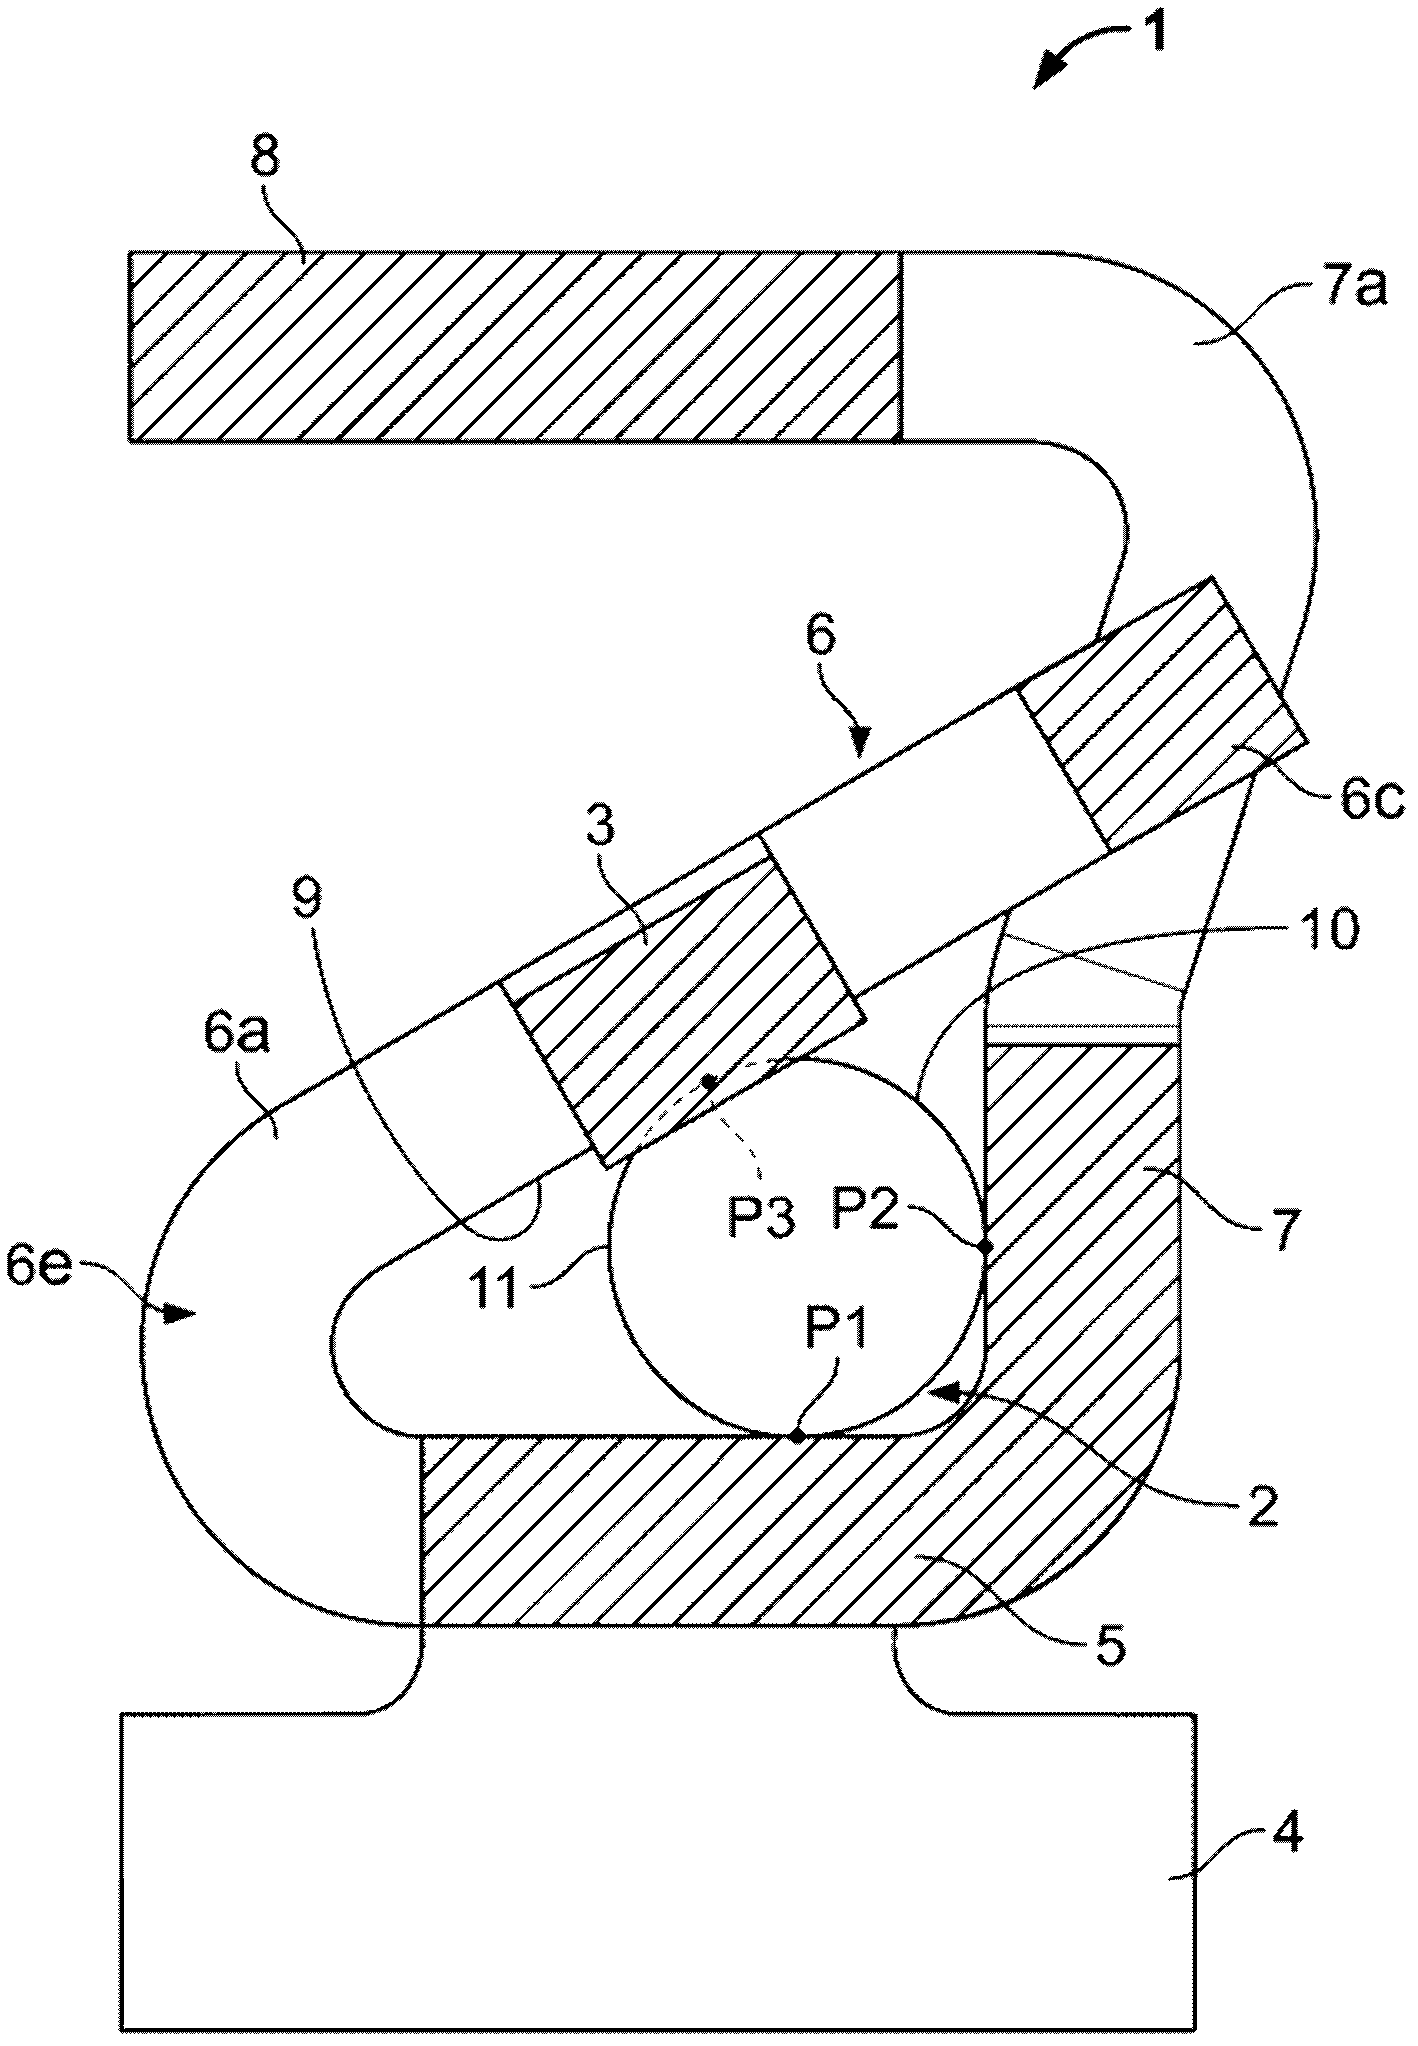 Terminal for connecting wires to printed circuit boards